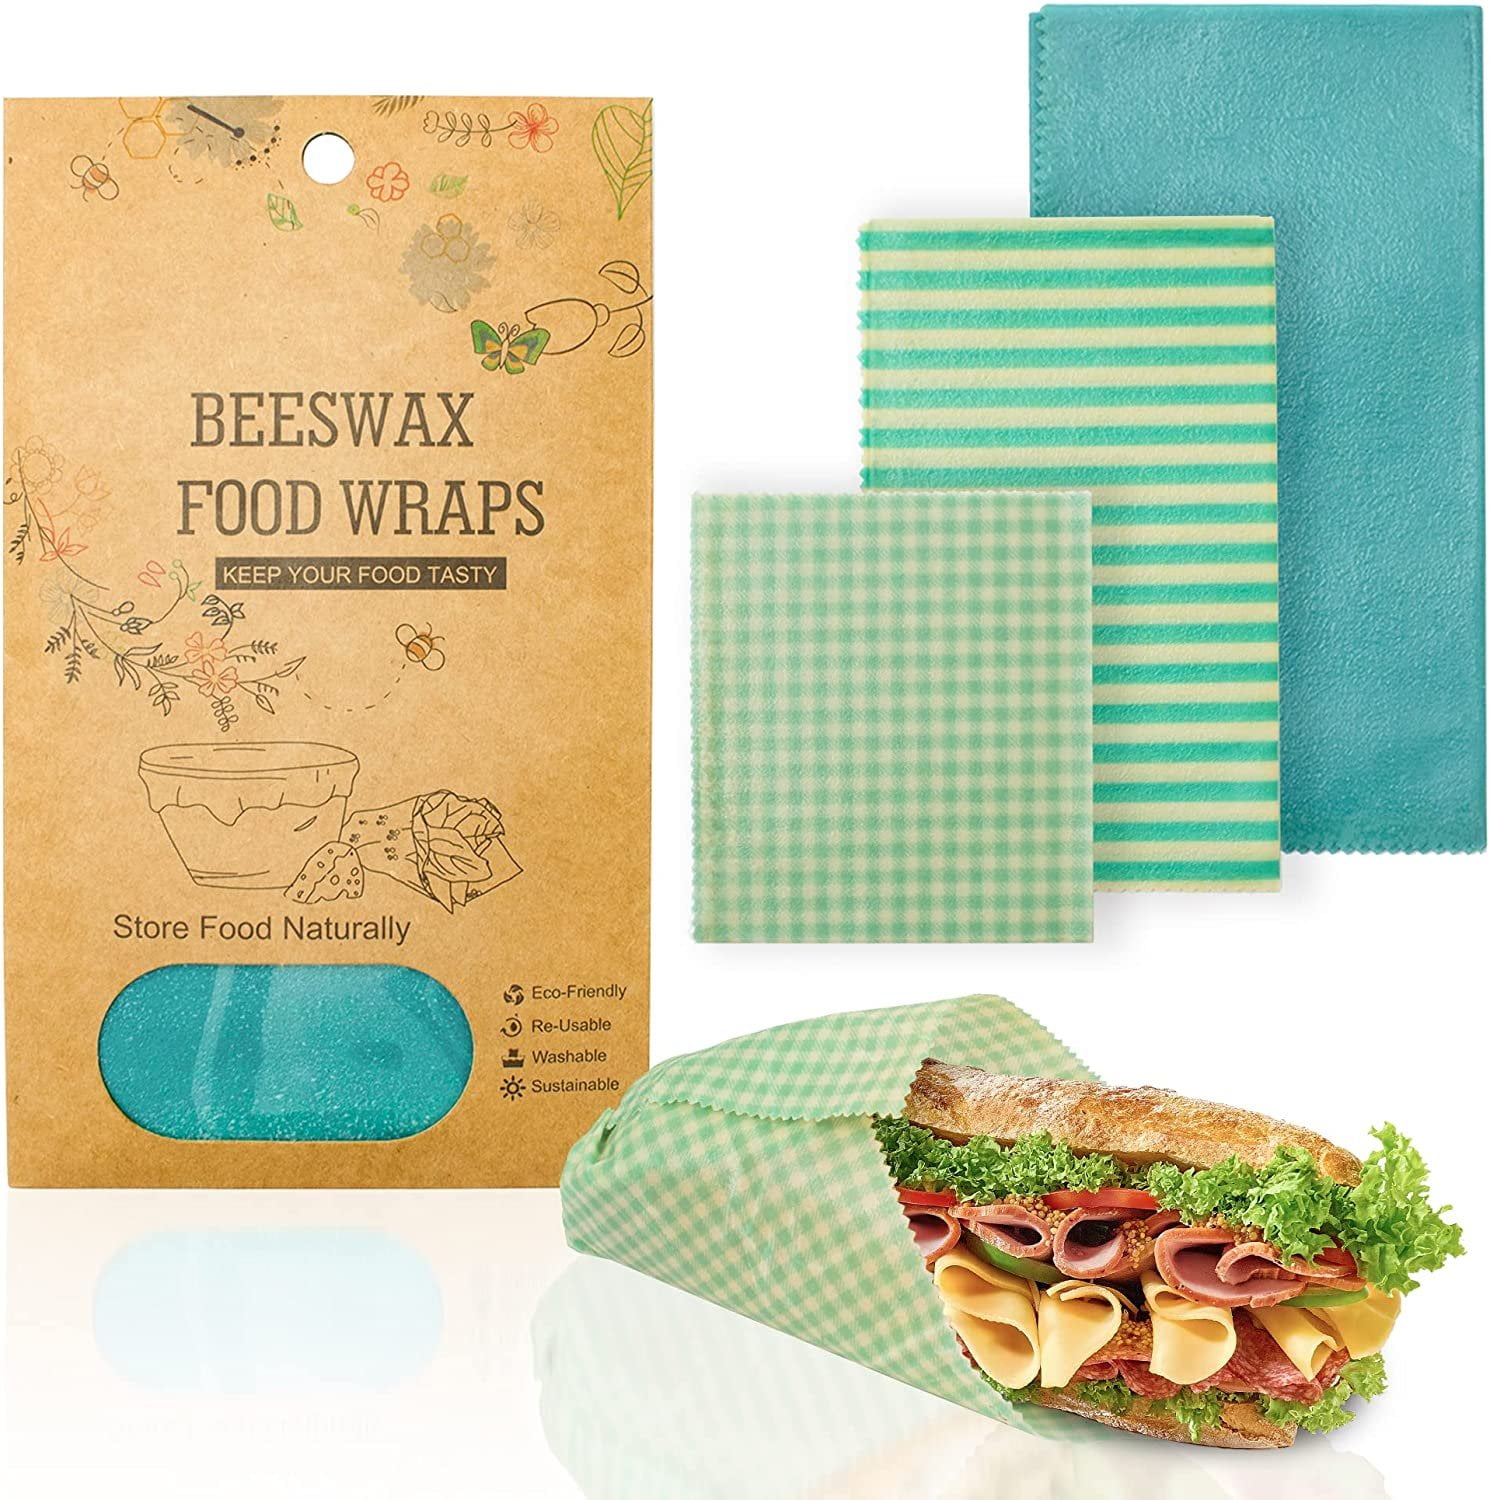 PUREVACY Reusable Beeswax Wrap Small, Medium, Large. 3 pack Teal Beeswax  Wraps for Food Storage. Natural Cotton and Bees Wax Wraps Reusable.